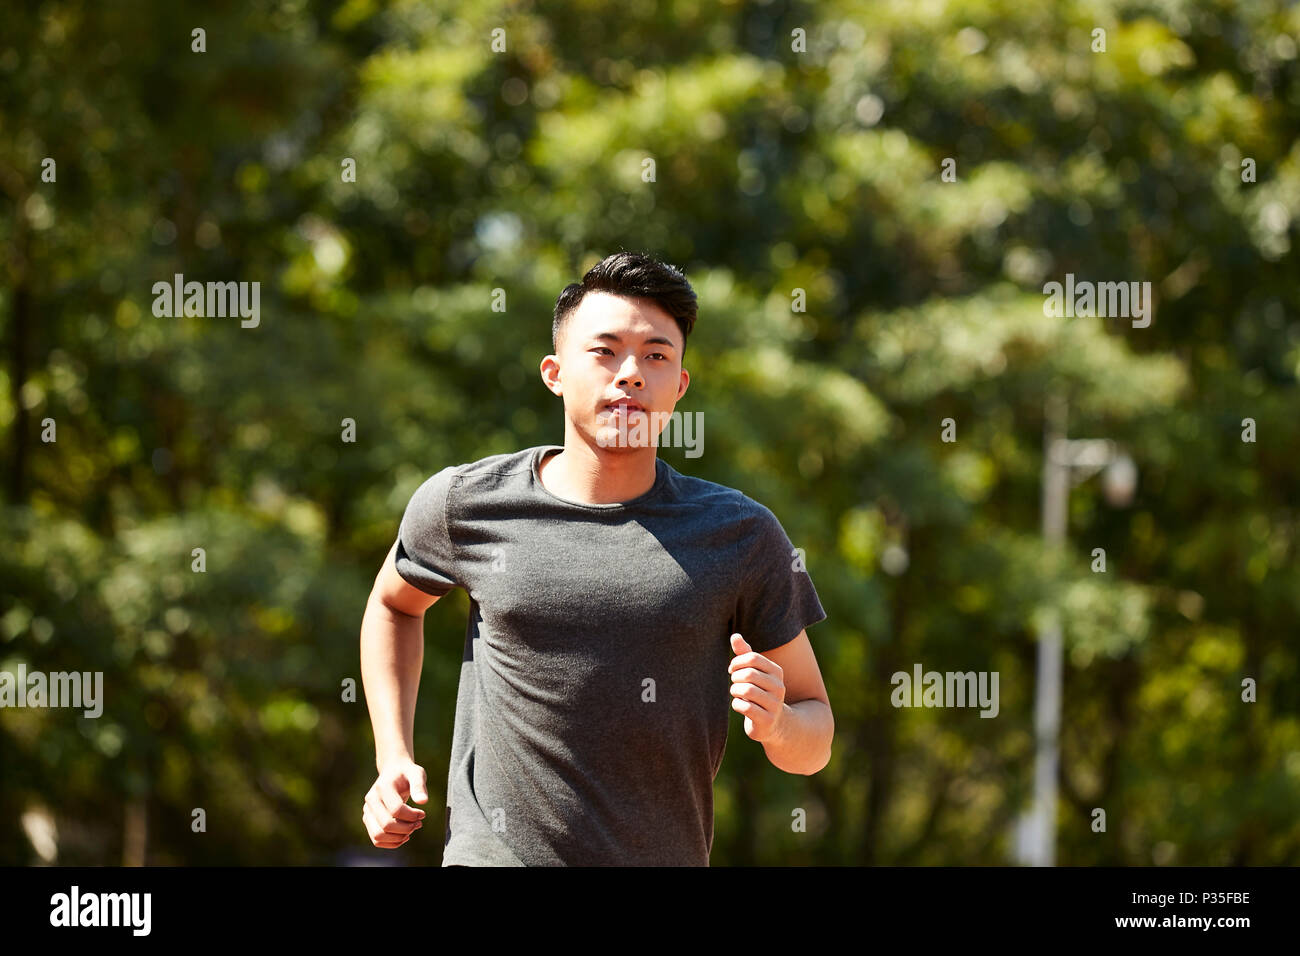 young asian adult man athlete running and training. Stock Photo